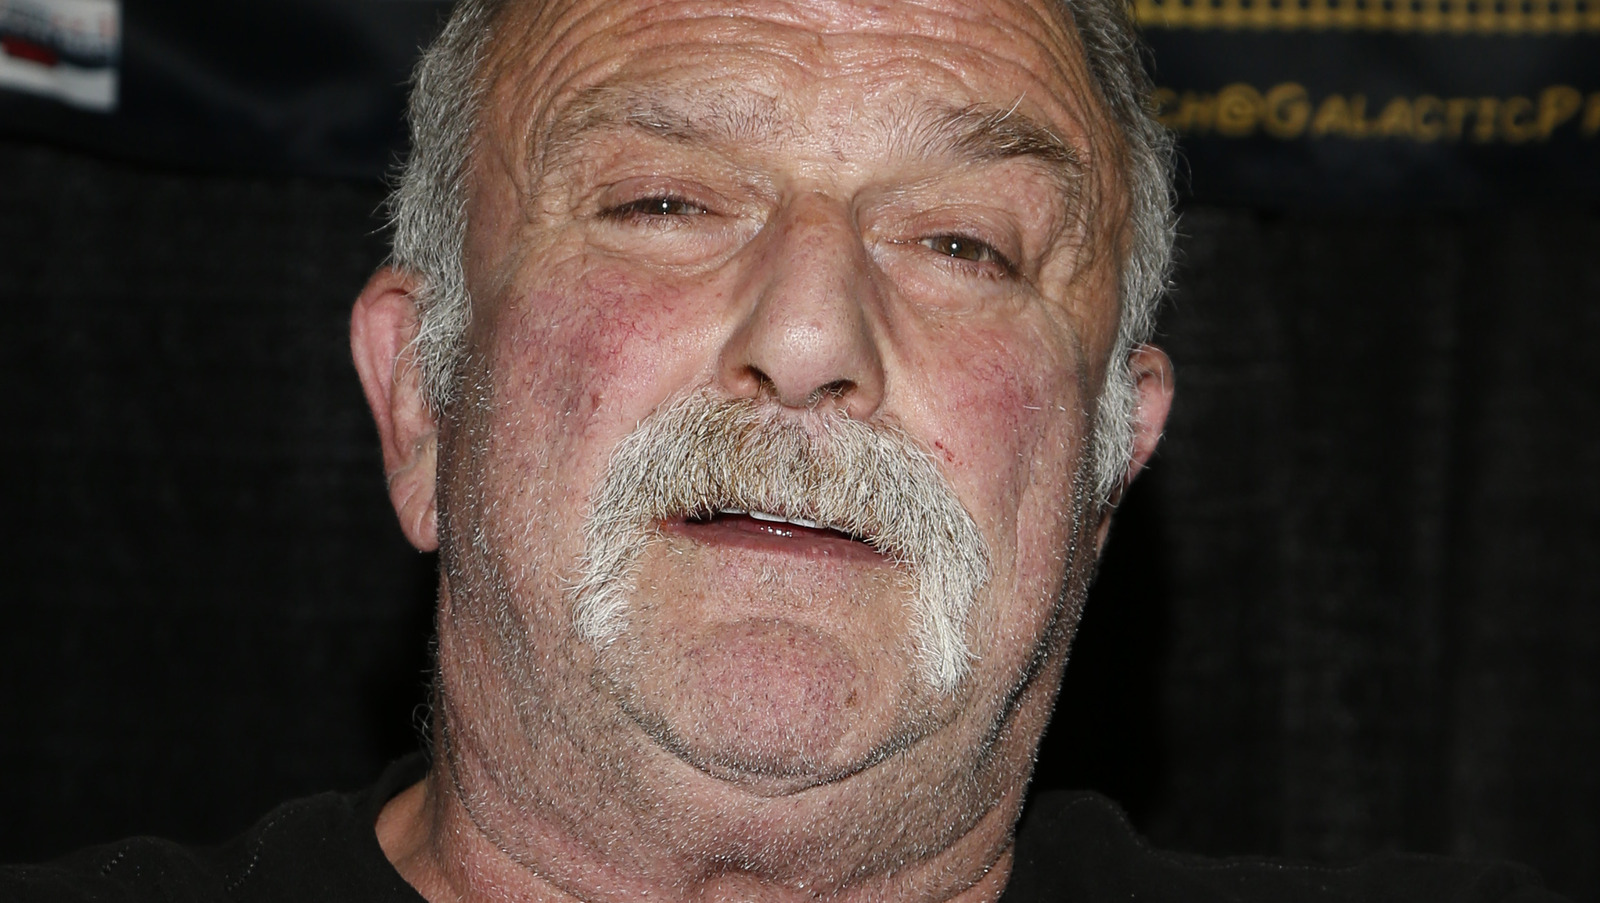 Jake Roberts Reflects On The Passing Of Former WWE Star Bushwhacker Butch